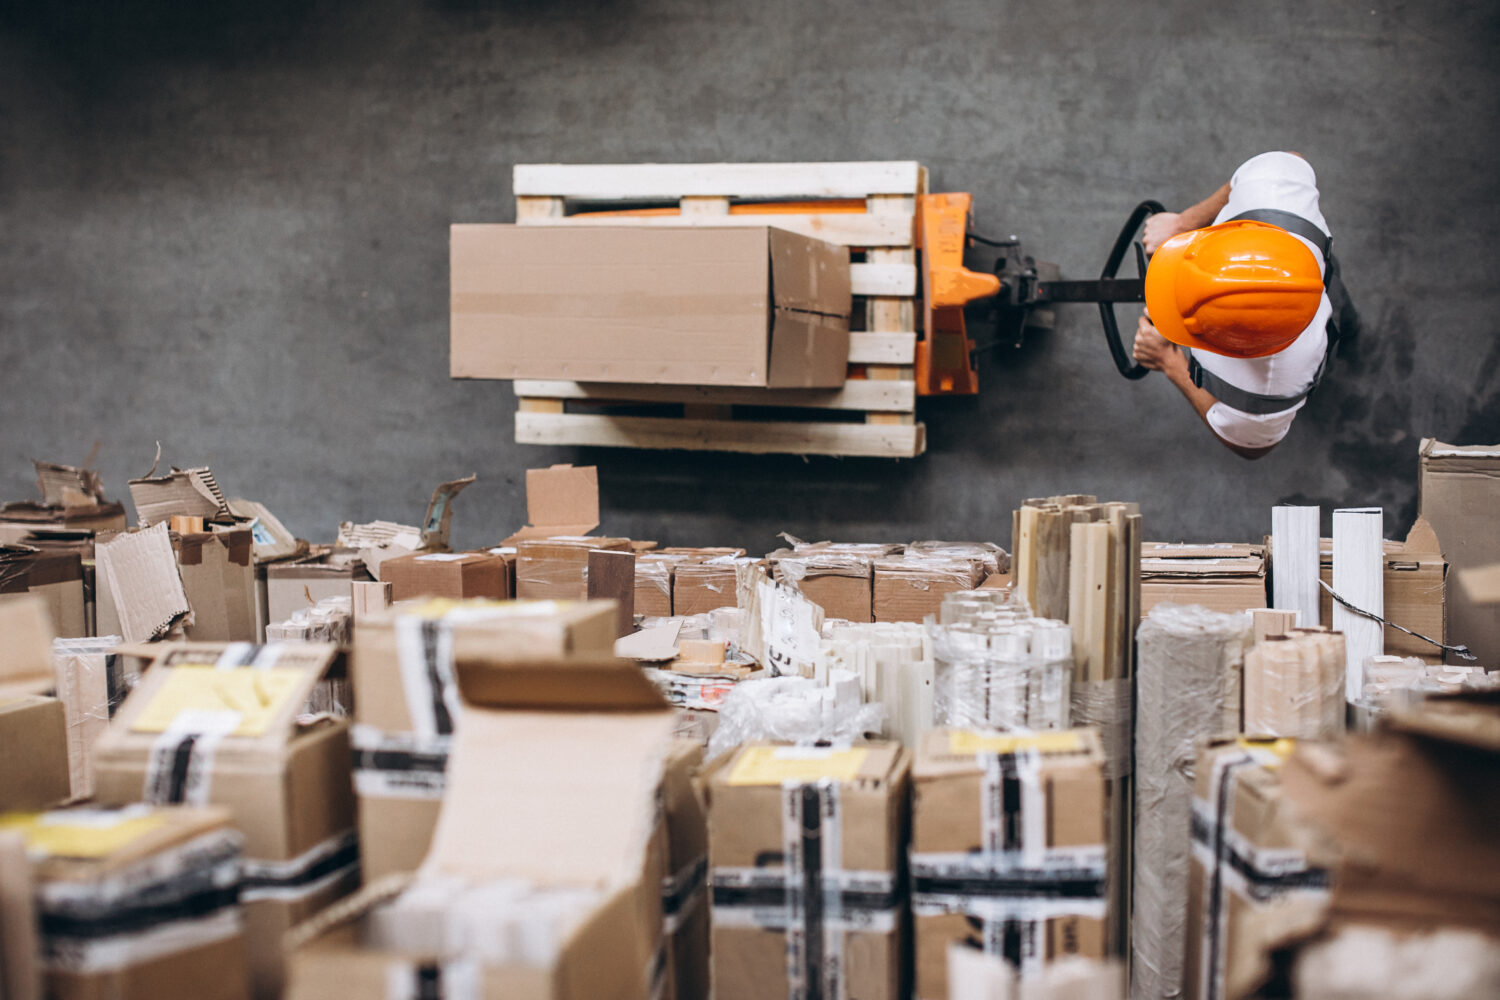 Improve your cash flow by managing your stock efficiently with inventory management software